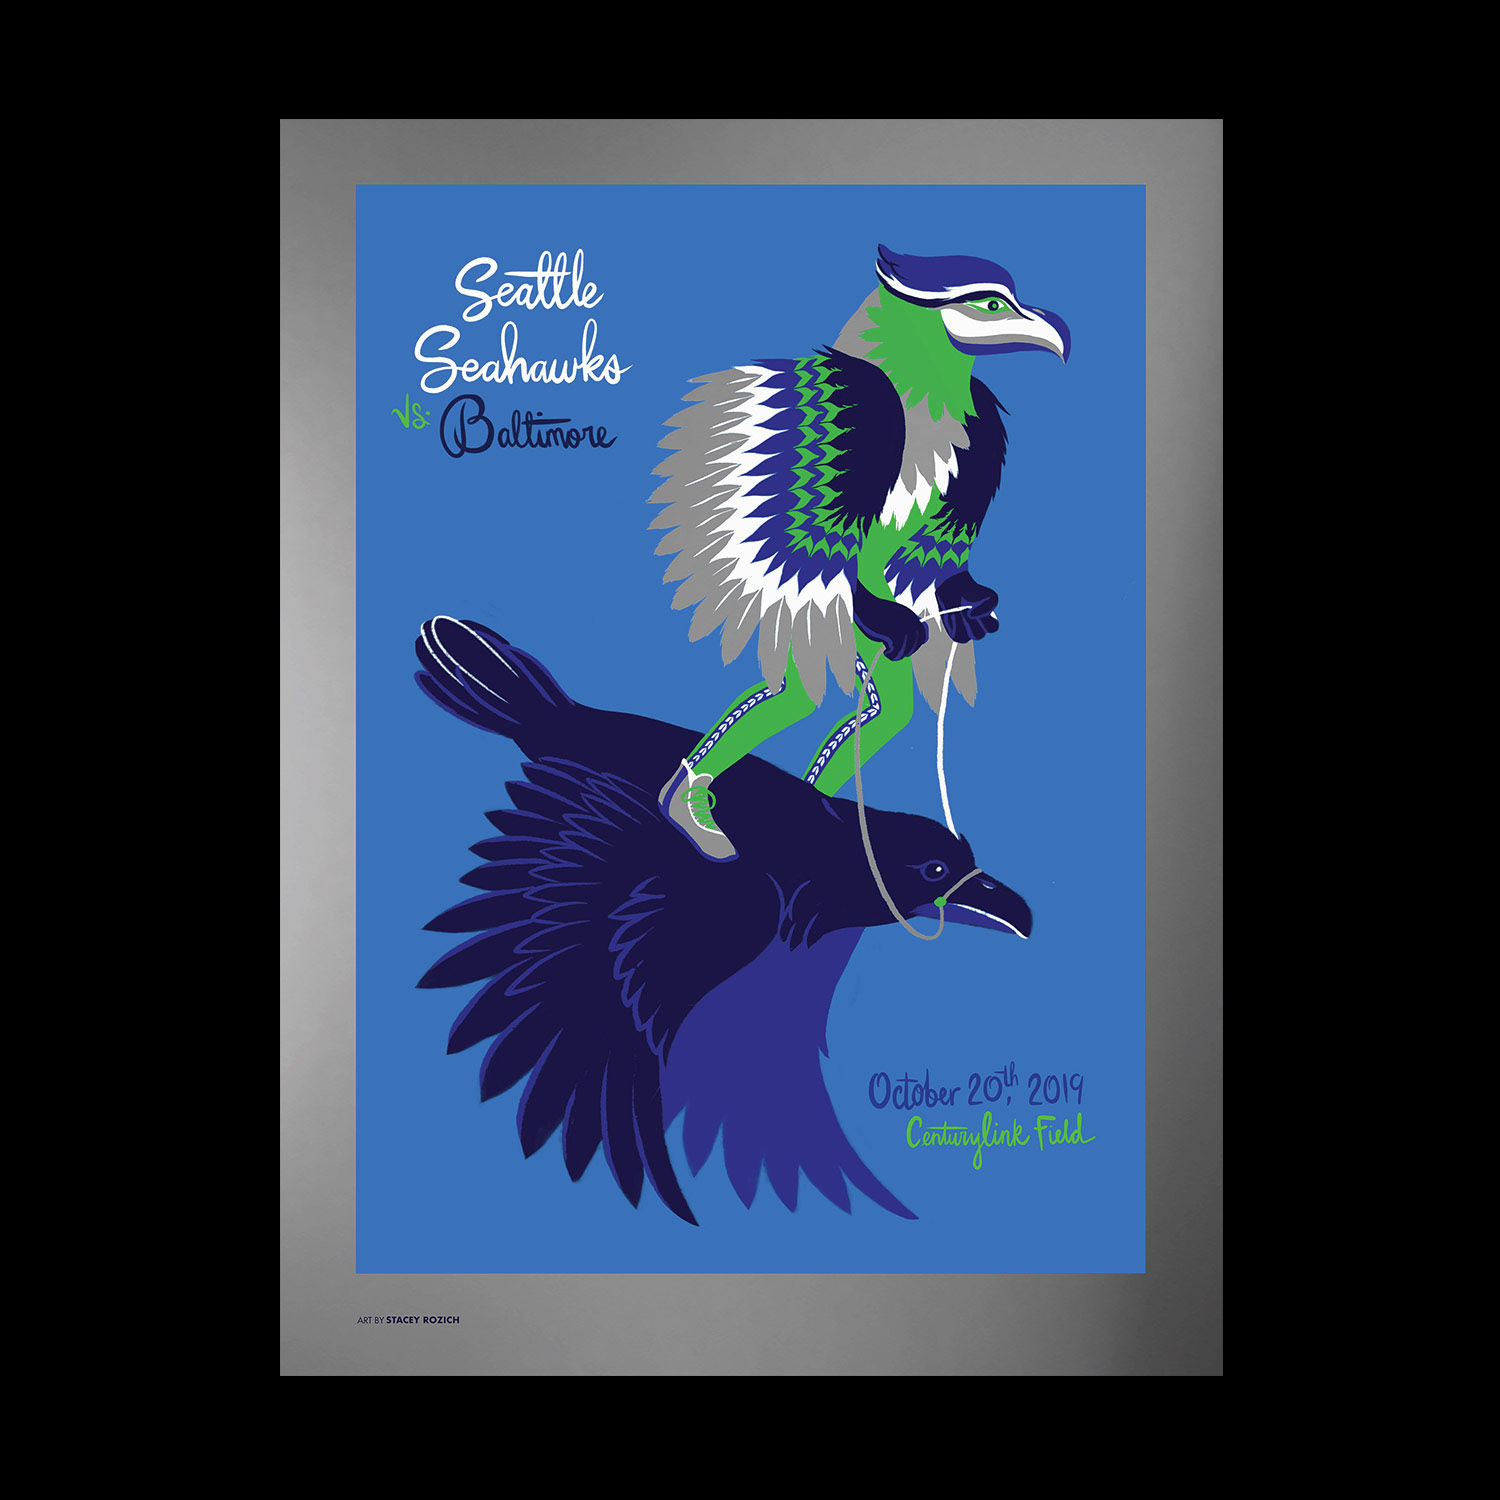 2022 Seahawks vs Cardinals Gameday Poster - Silver Variant – Ames Bros